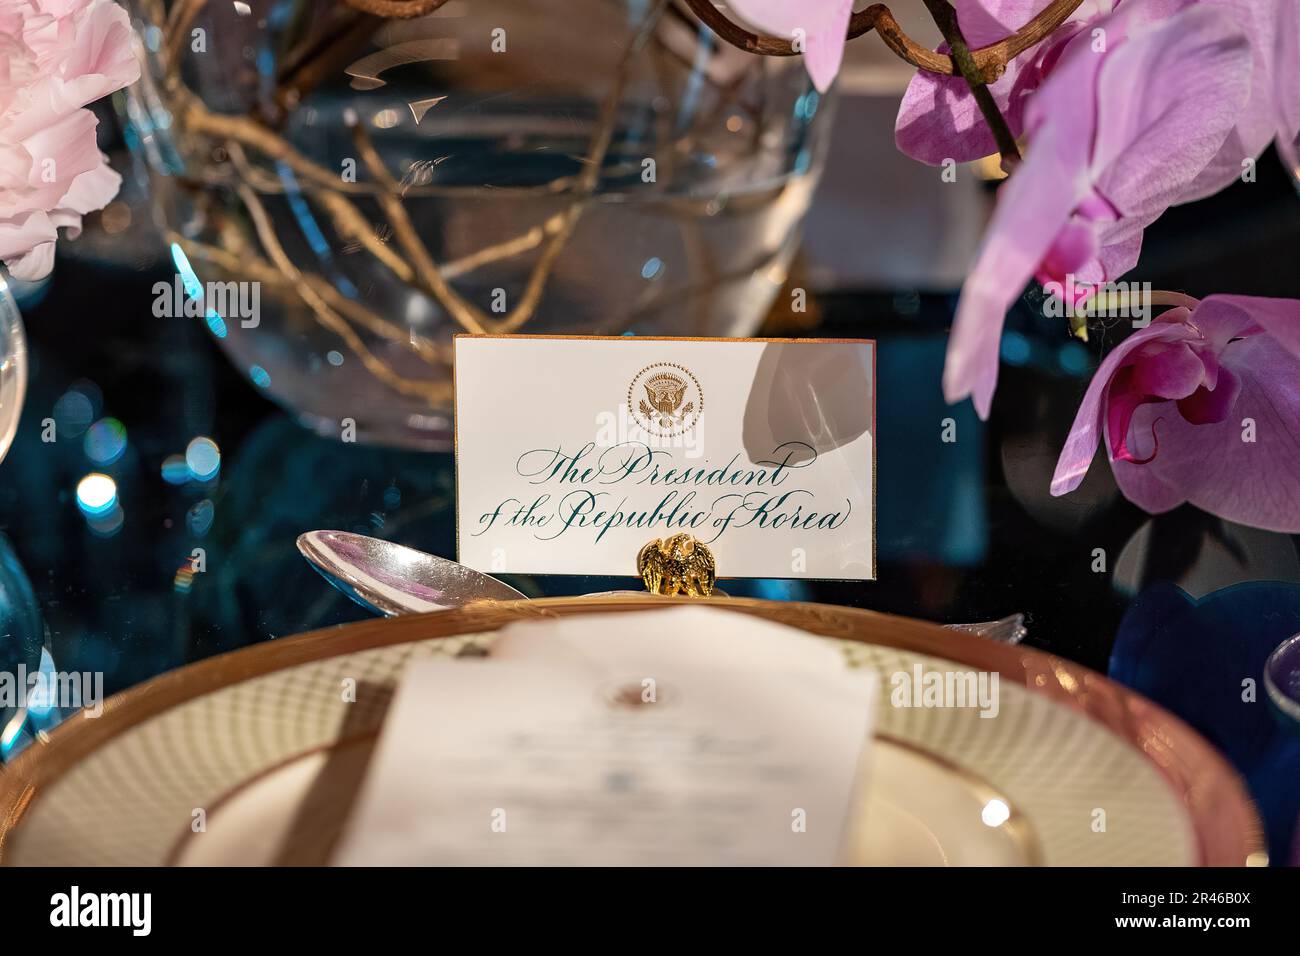 Tables in the East Room of the White House are set for a State Dinner in honor of President of the Republic of Korea Yoon Suk Yeol and First Lady Mrs. Kim Keon Hee, Wednesday, April 26, 2023. (Official White House Photo by Katie Ricks) Stock Photo